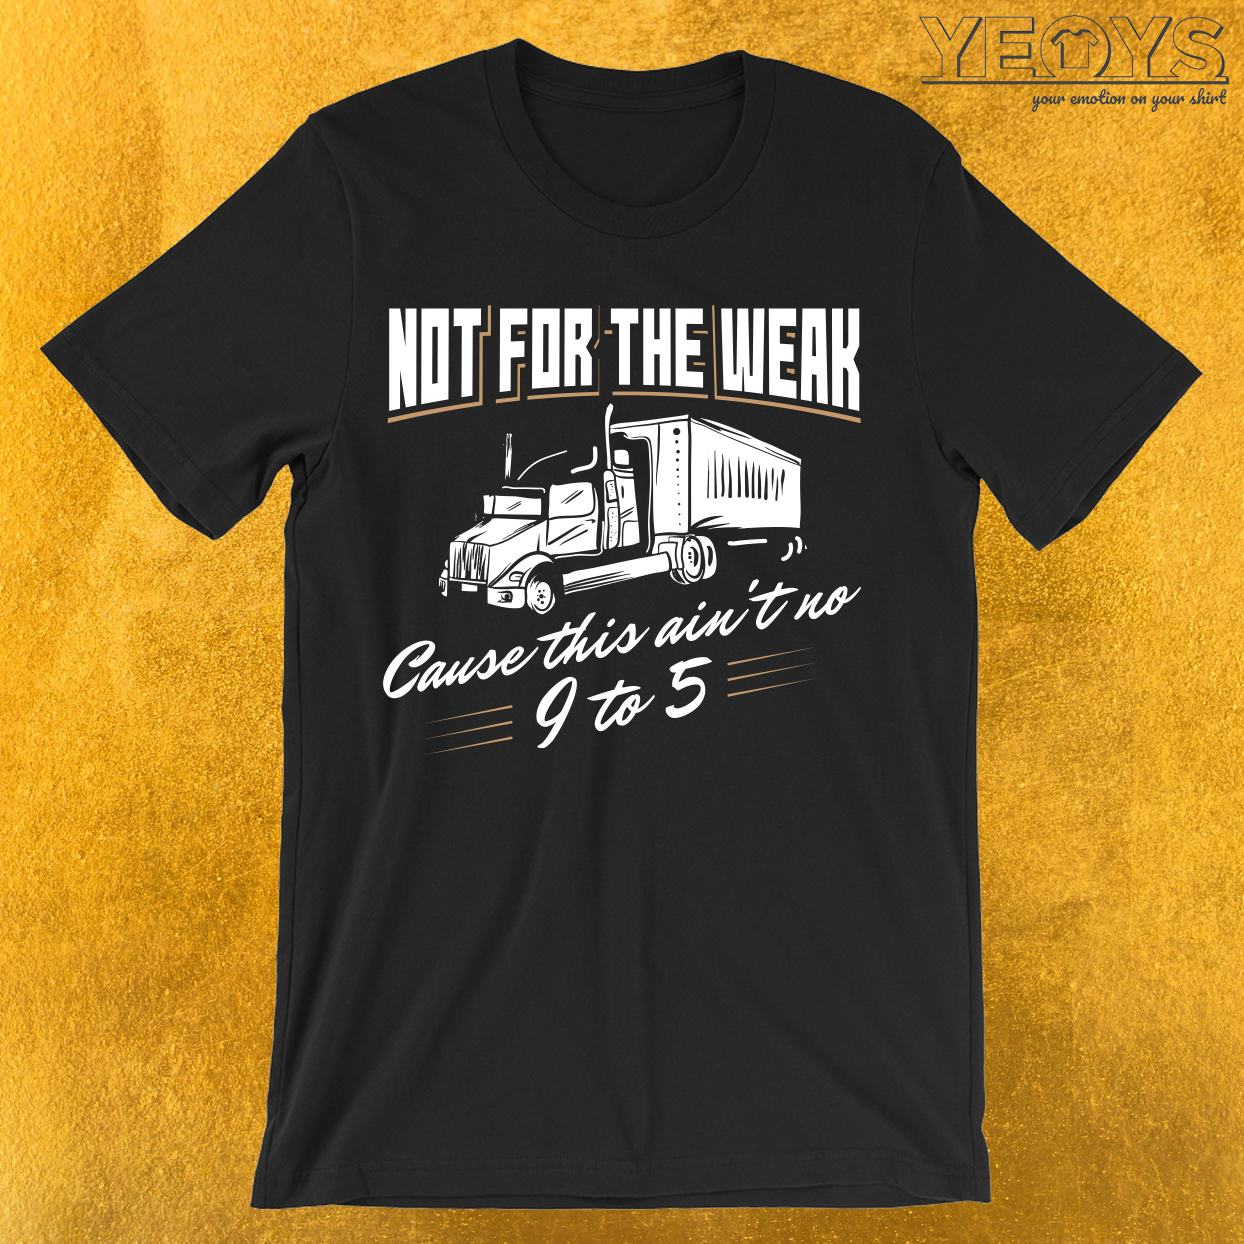 Not For The Weak Cause This Ain’t No 9 To 5. T-Shirt